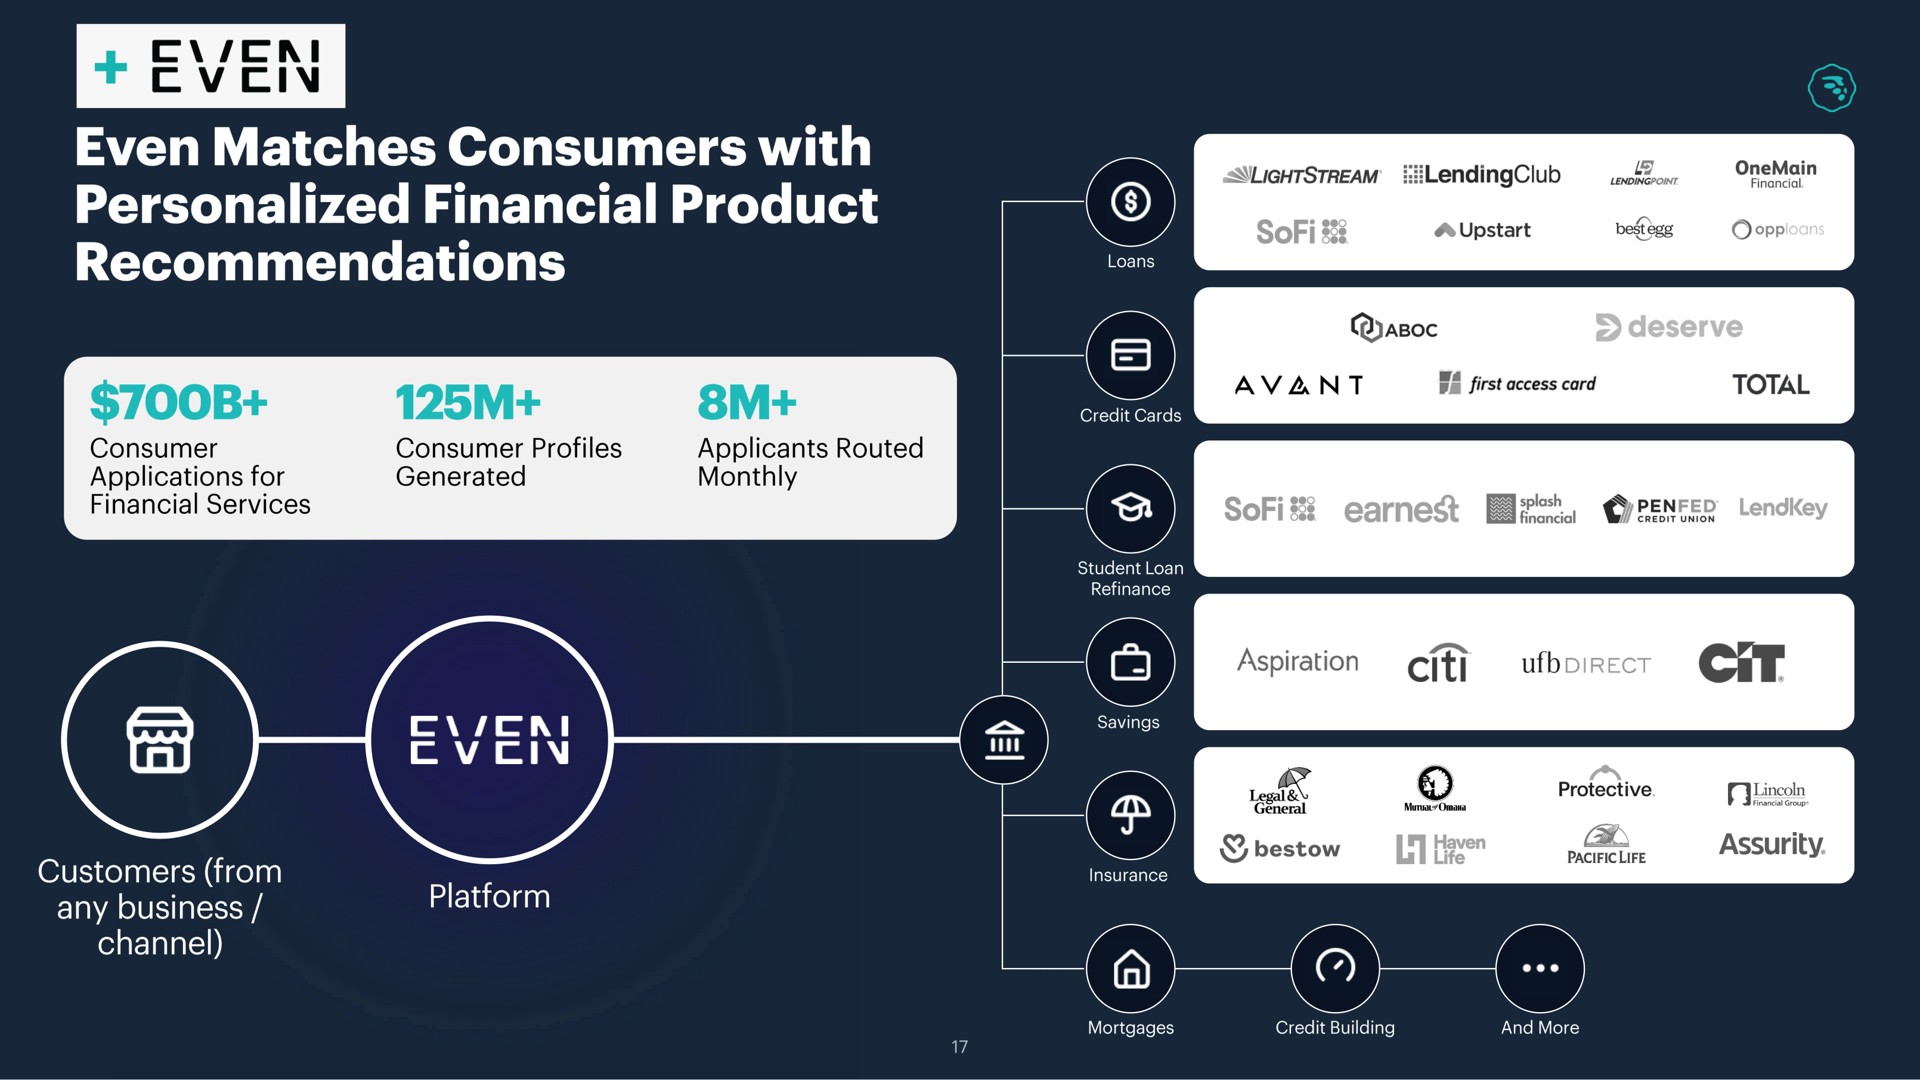 even matches consumers with personalized financial product recommendations financial services | MoneyLion